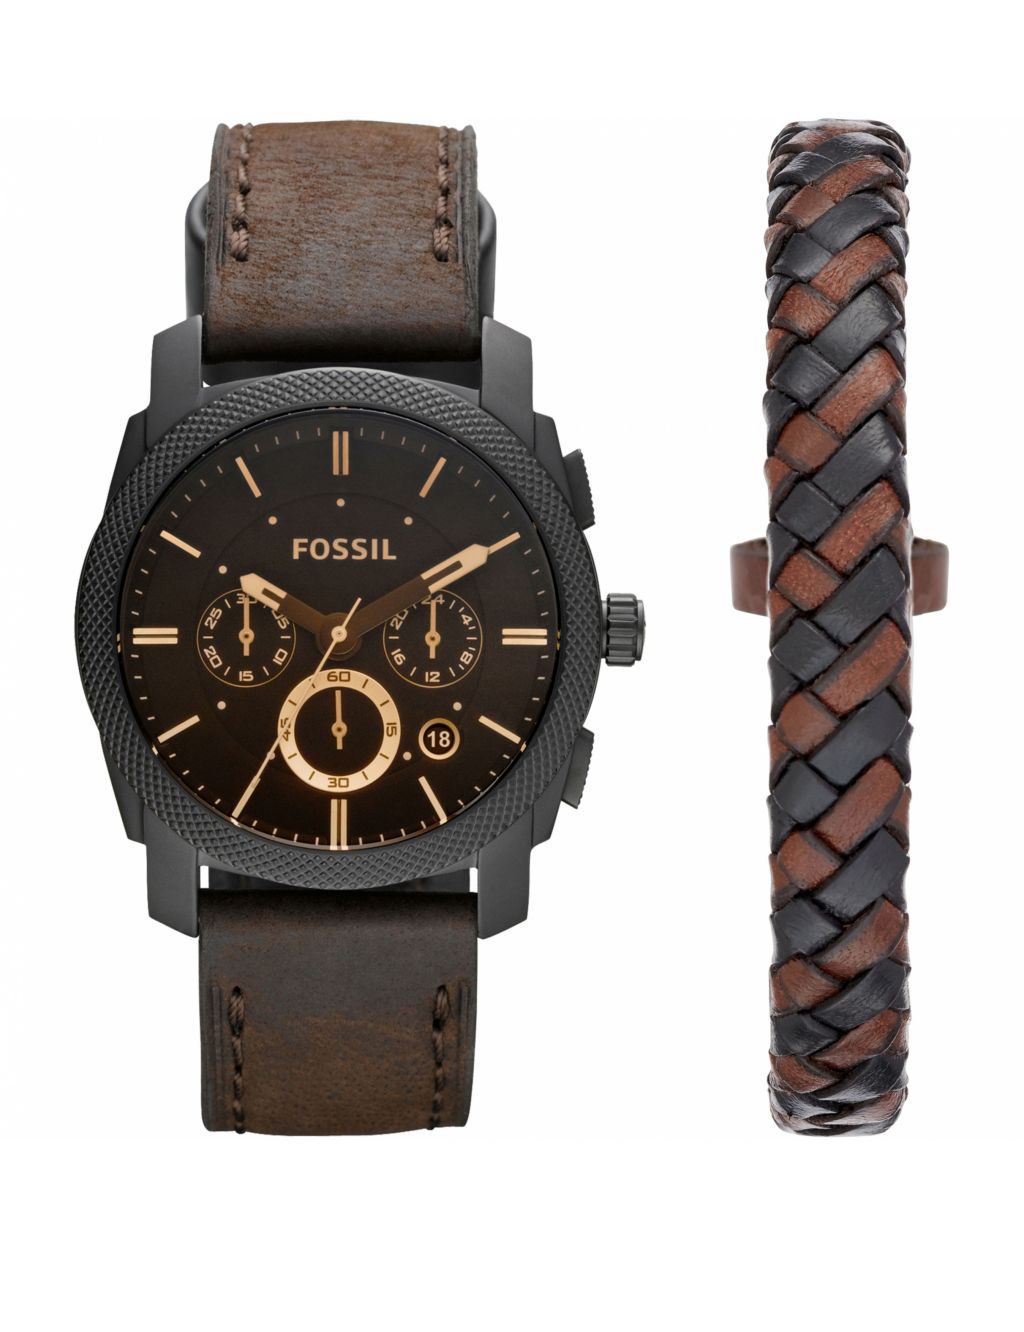 Fossil Machine Brown Leather Chronograph Watch Gift Set image 1